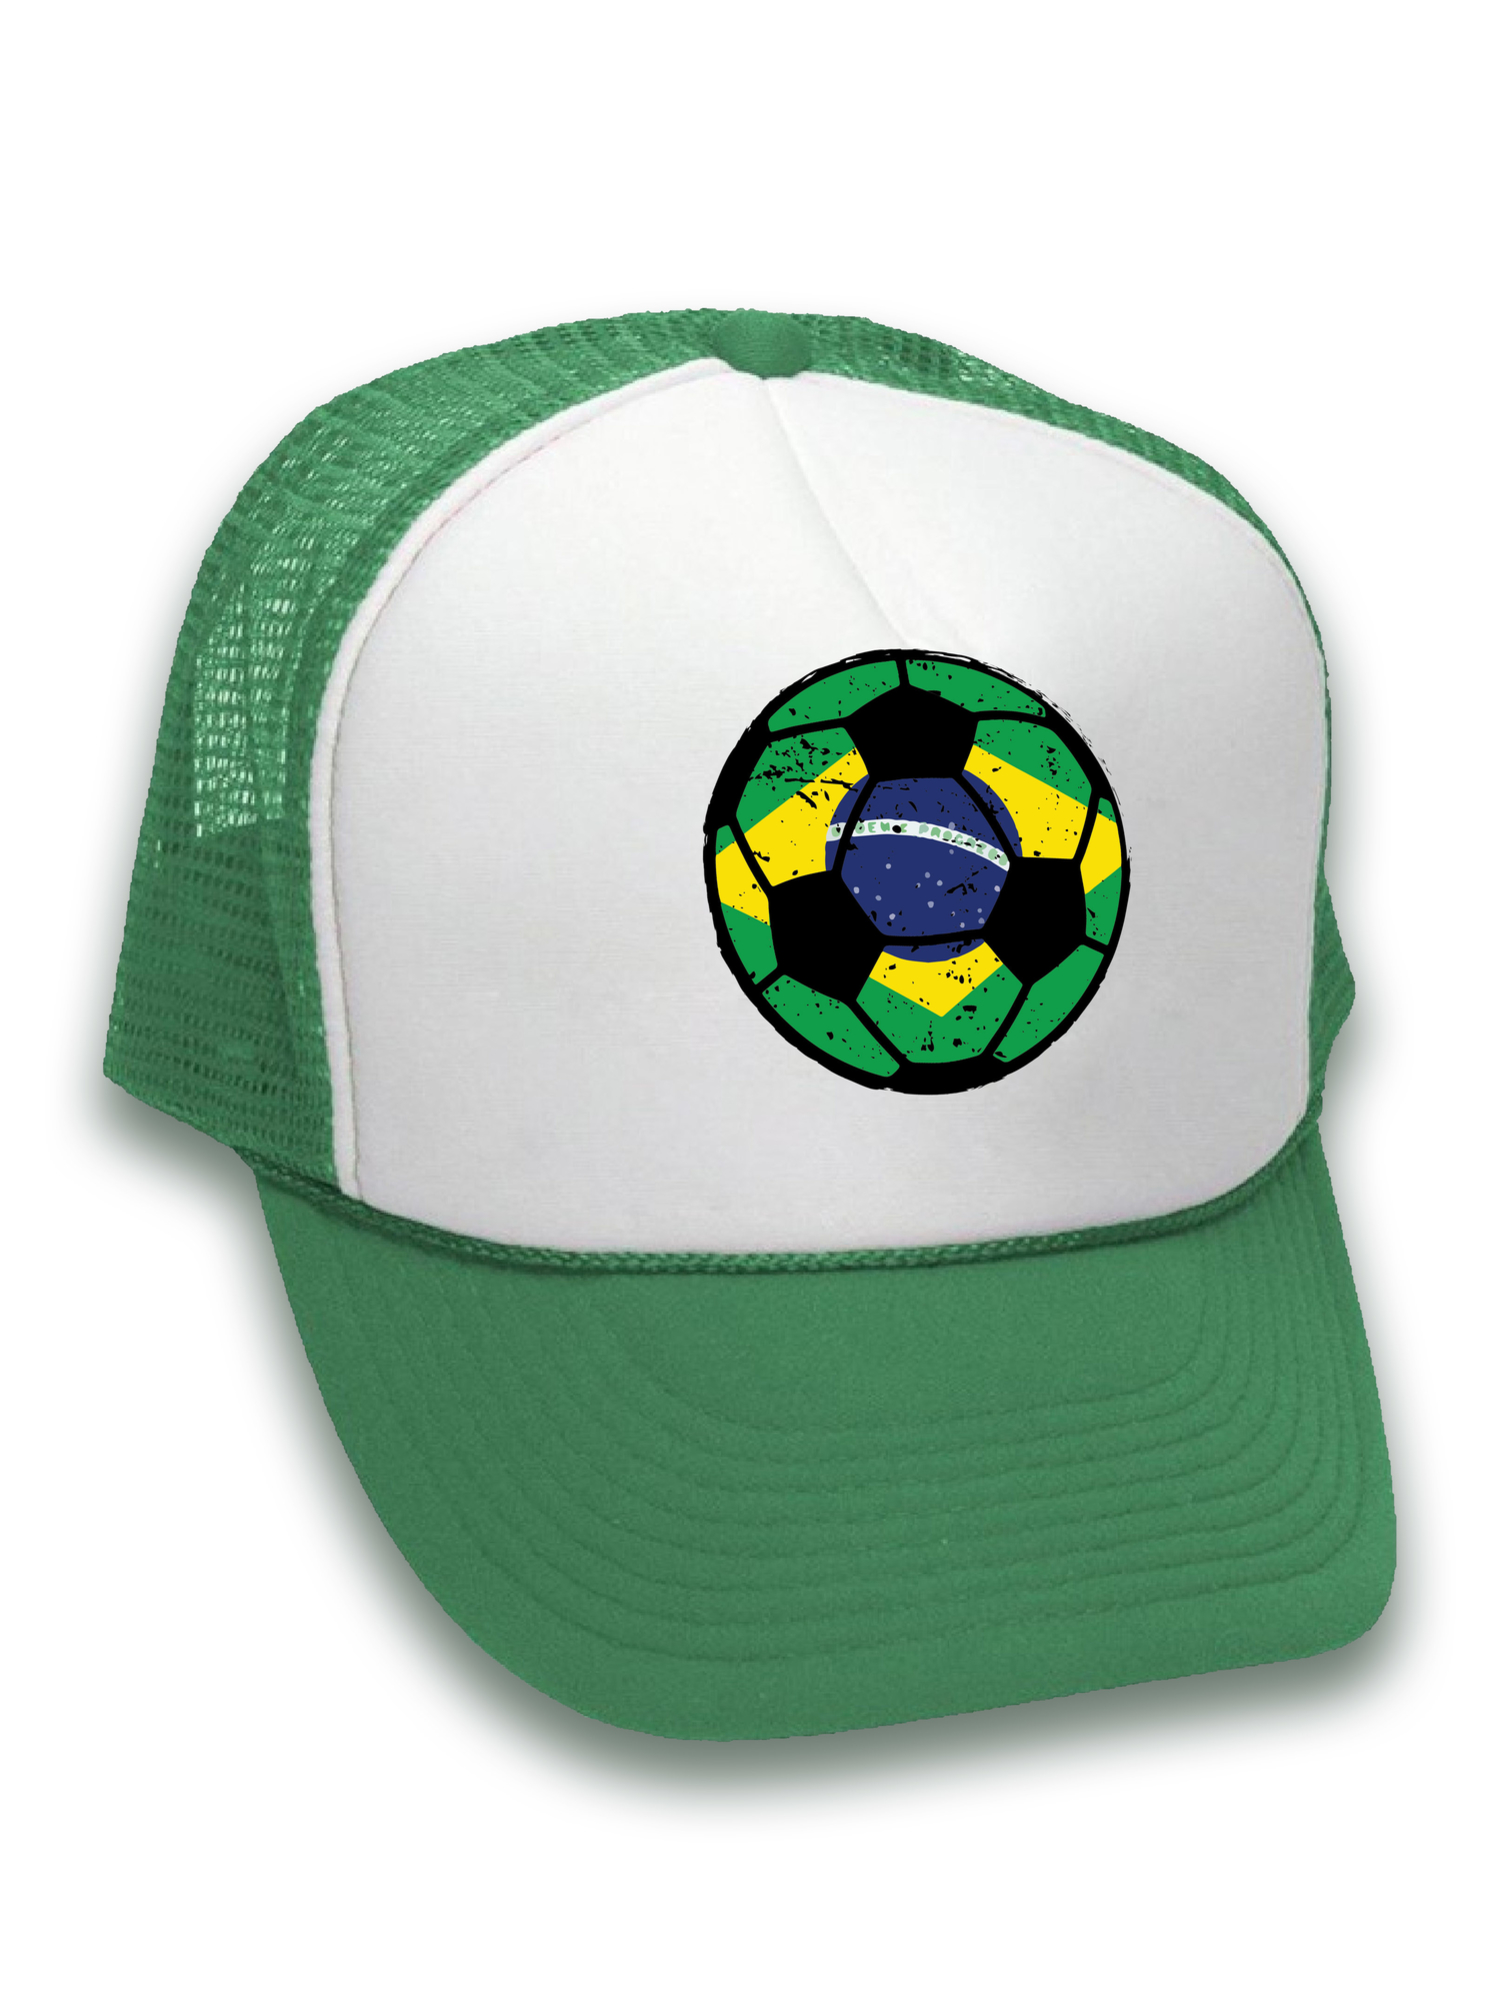 Awkward Styles Brazil Soccer Ball Hat Brazilian Soccer Trucker Hat Brazil 2018 Baseball Cap Brazil Trucker Hats for Men and Women Hat Gifts from Brazil Brazilian Baseball Hats Brazilian Flag Hat - image 2 of 6